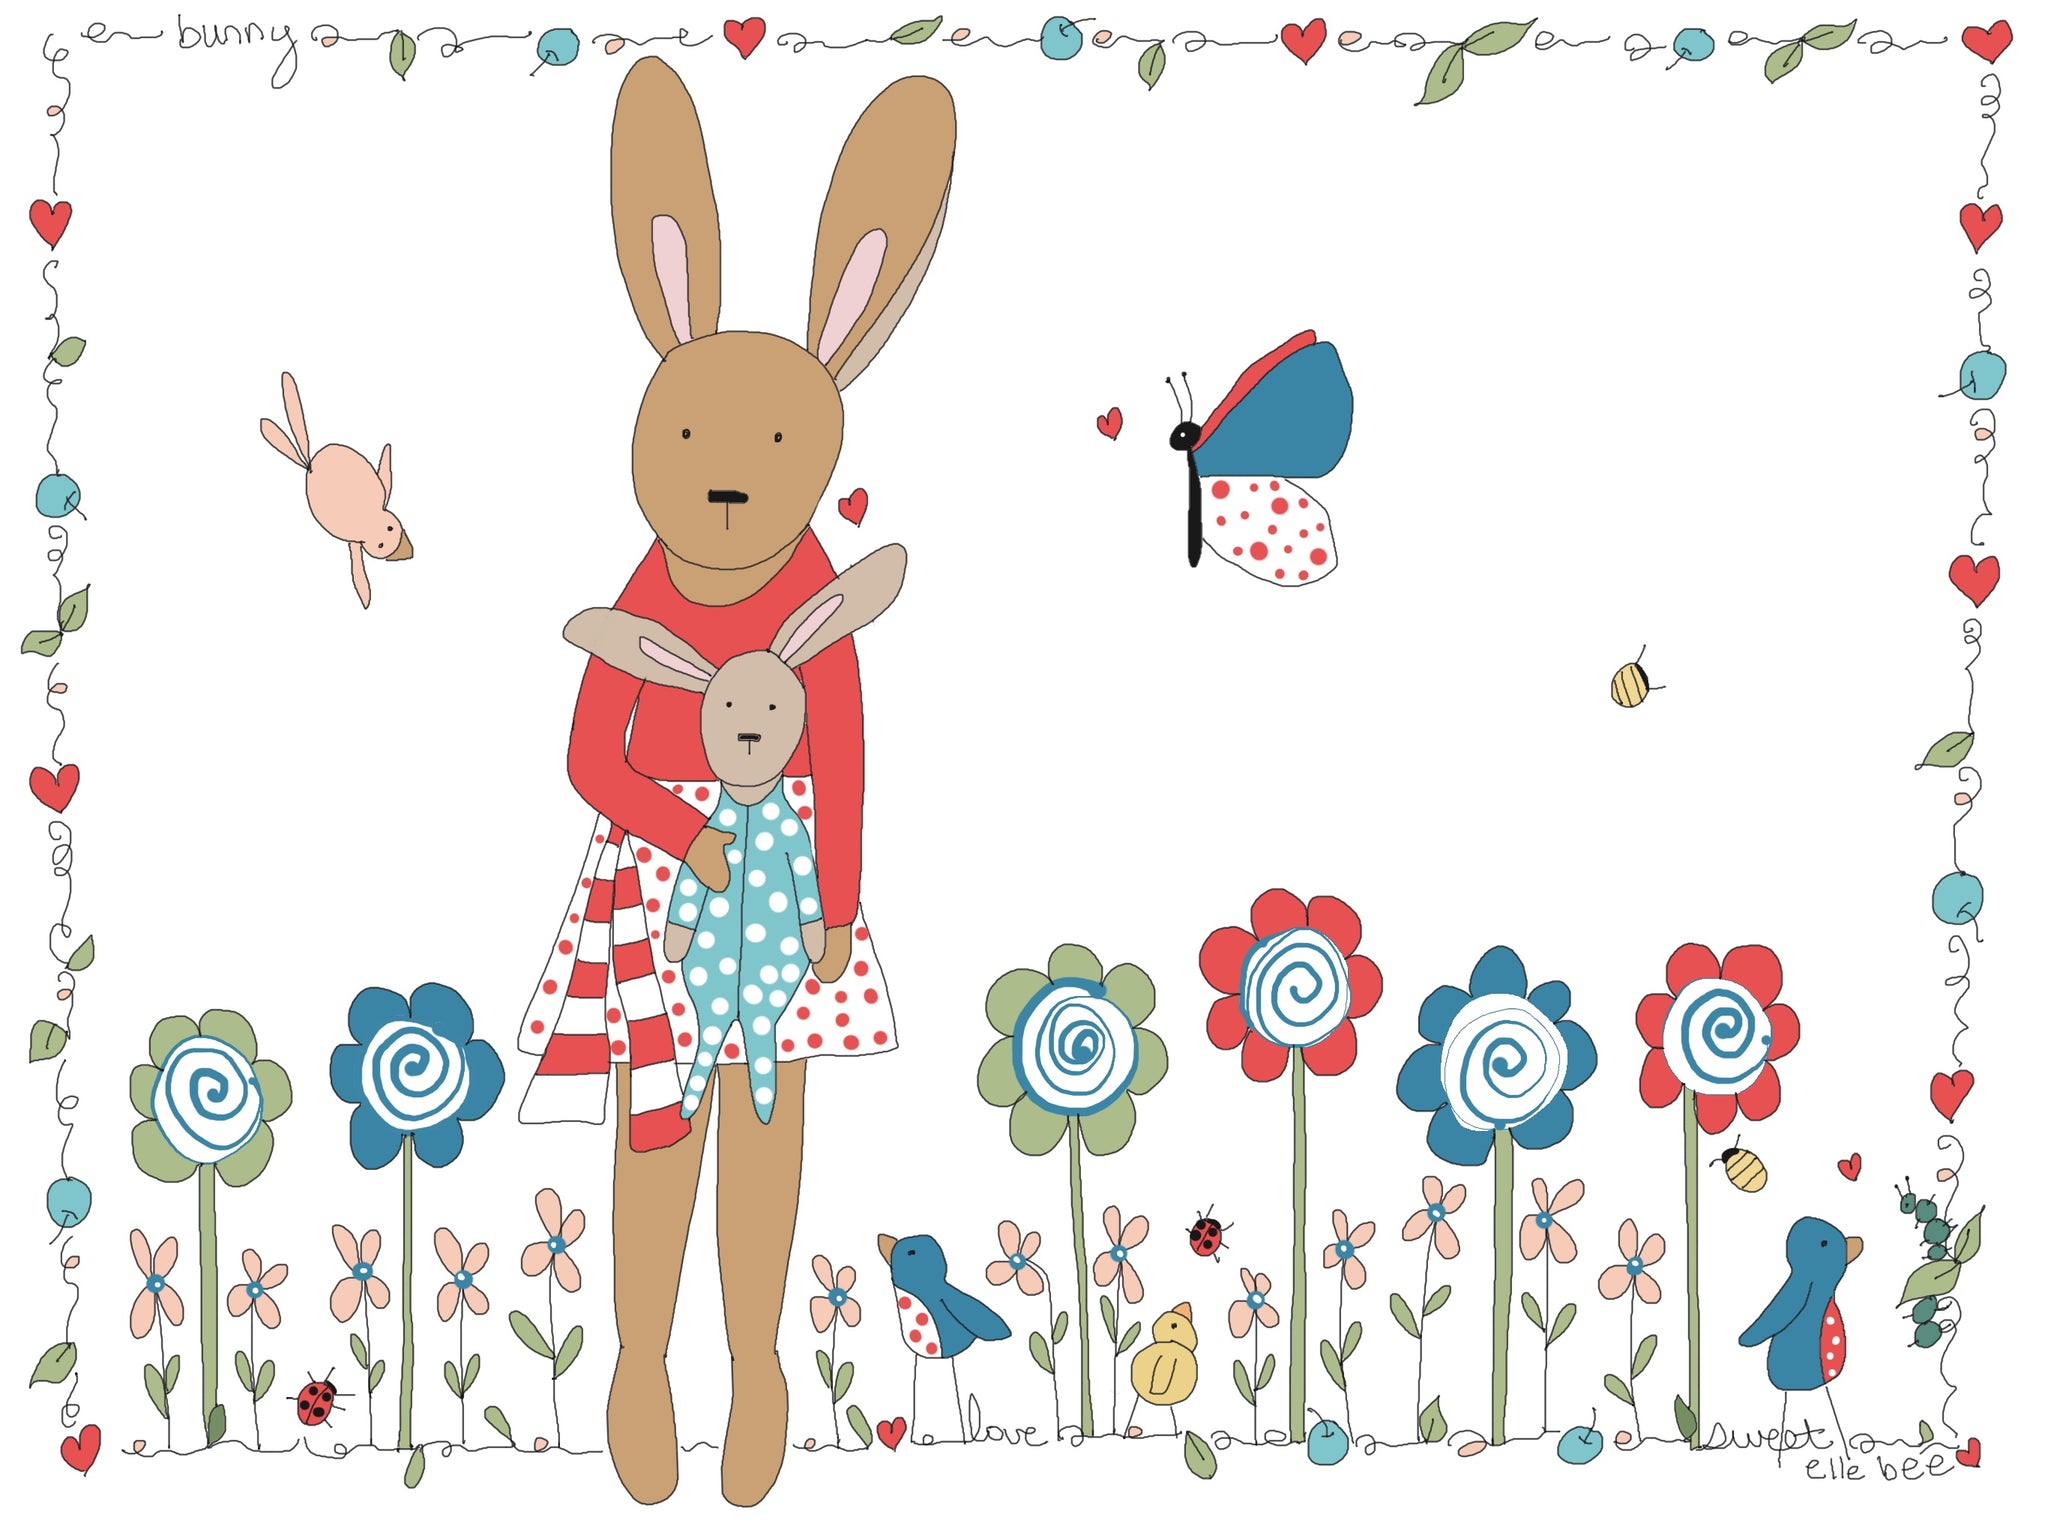 Greeting card "Welcome baby bunny"